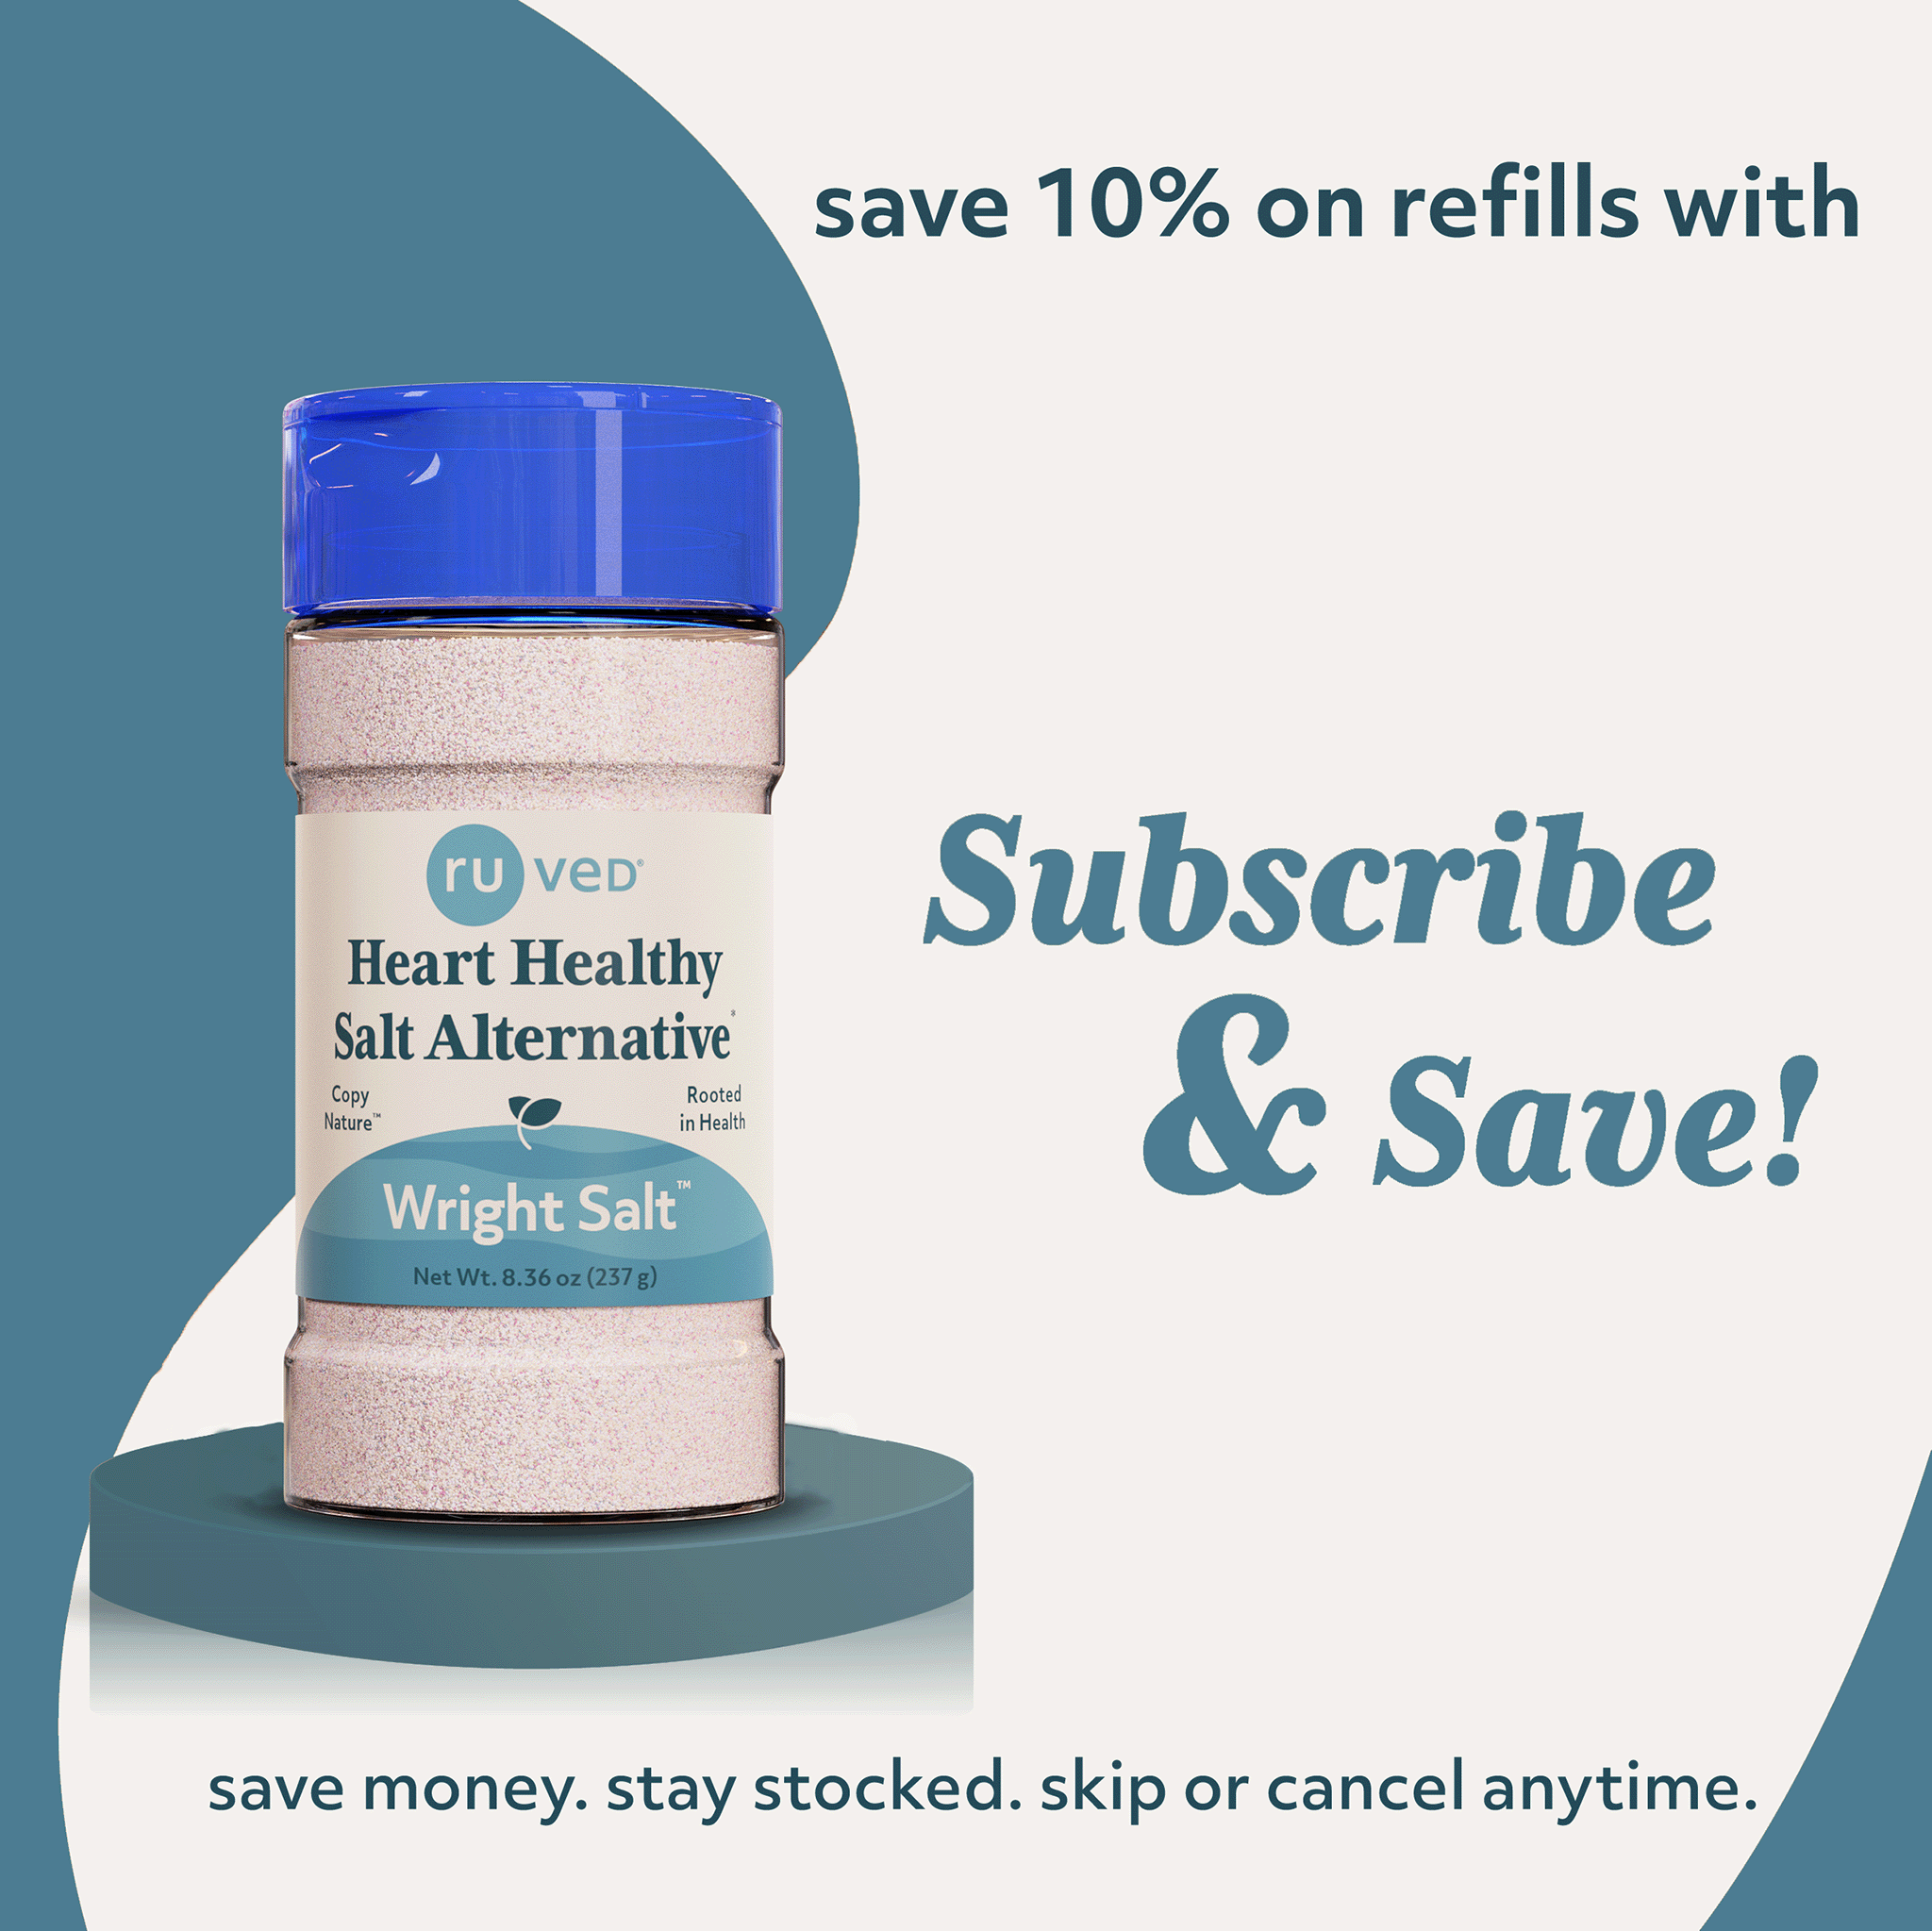 Save 10% on refills with subscribe and save! Save money and stay stocked. Skip or cancel anytime. 